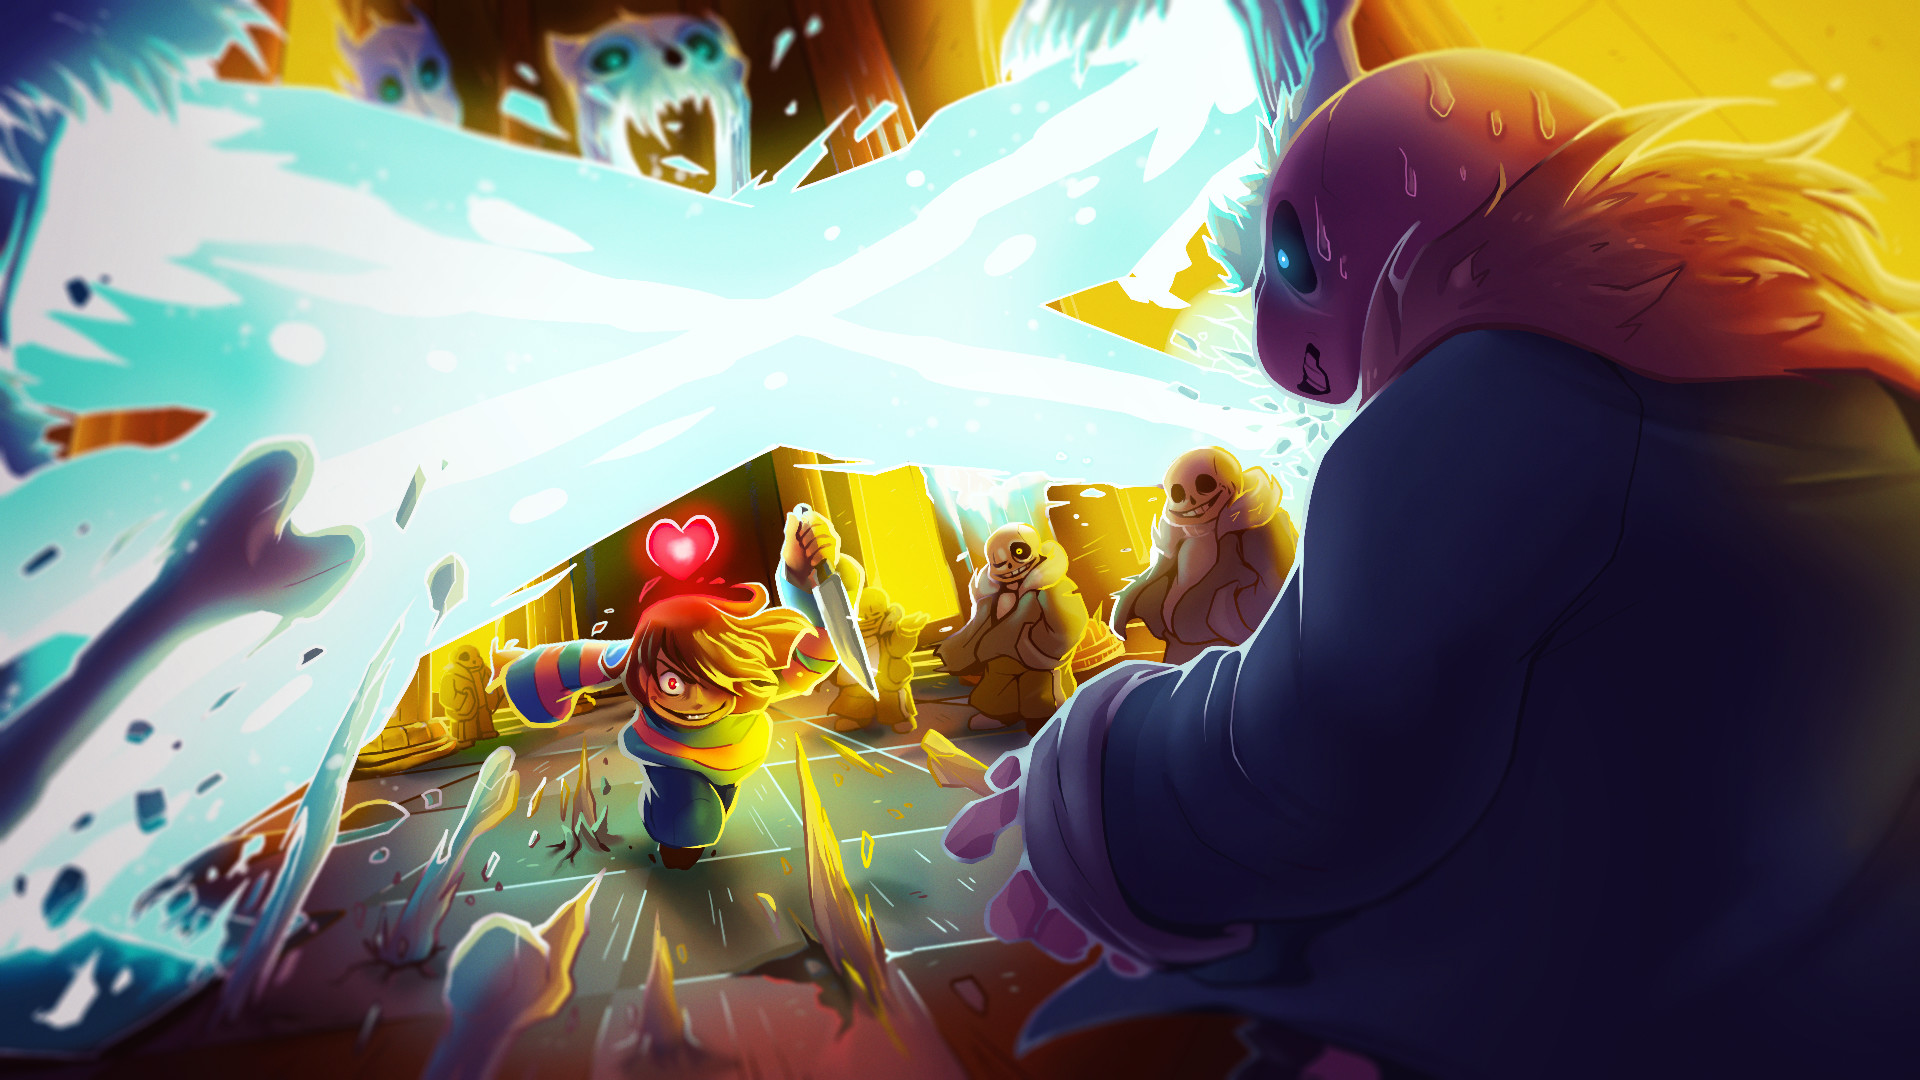 Undertale Wallpapers boss battles of genocide, neutral, and pacifist endings